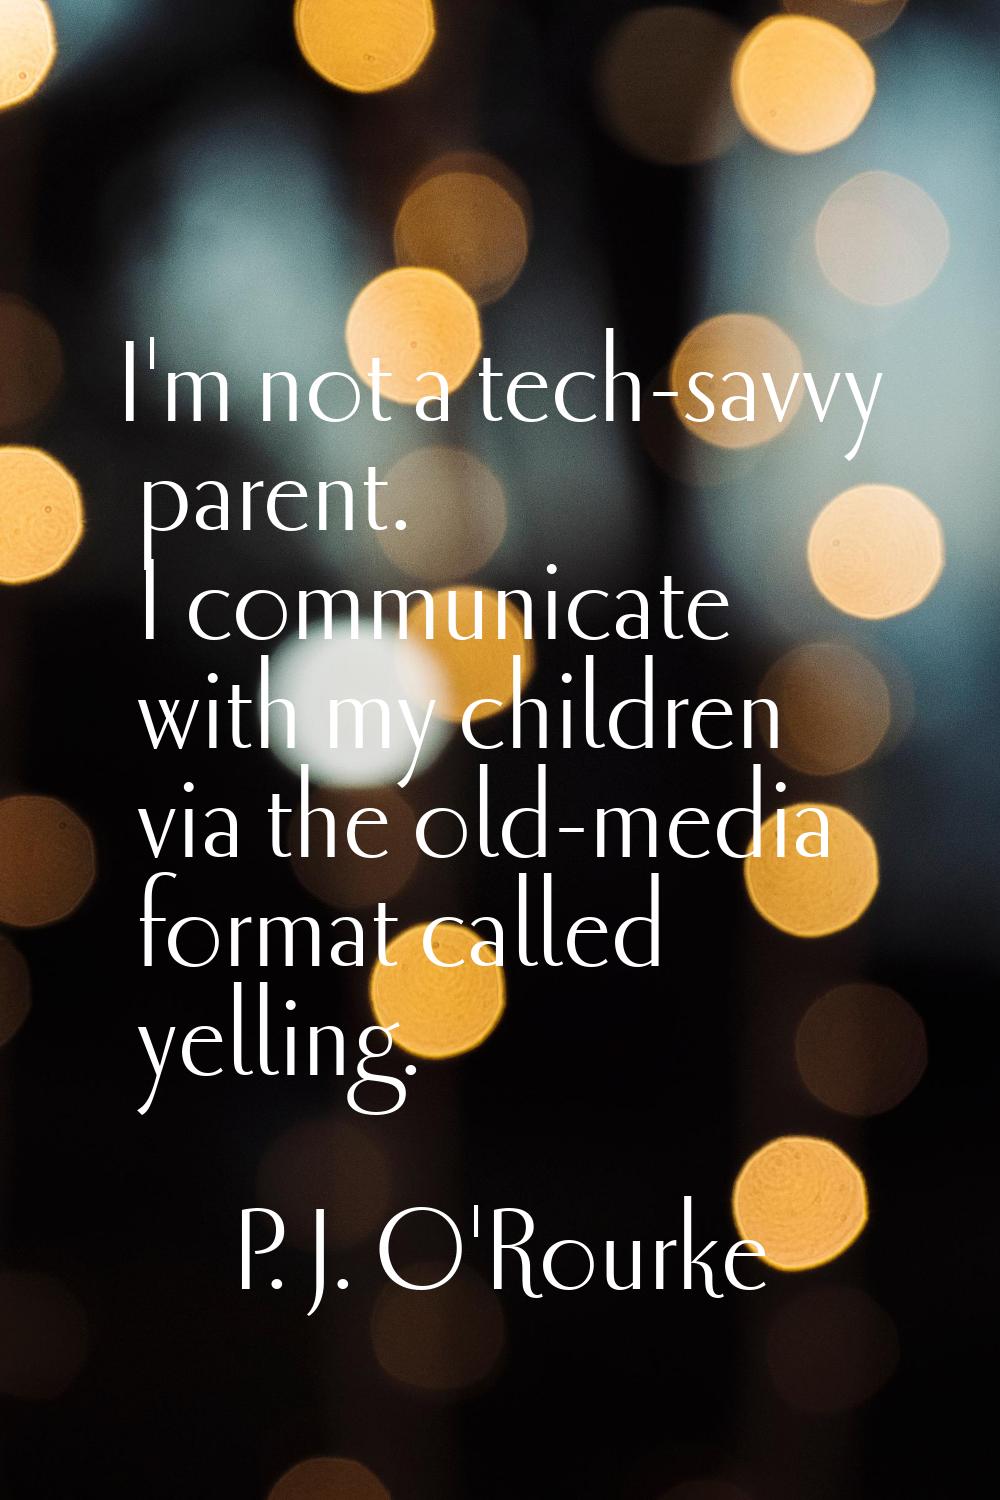 I'm not a tech-savvy parent. I communicate with my children via the old-media format called yelling